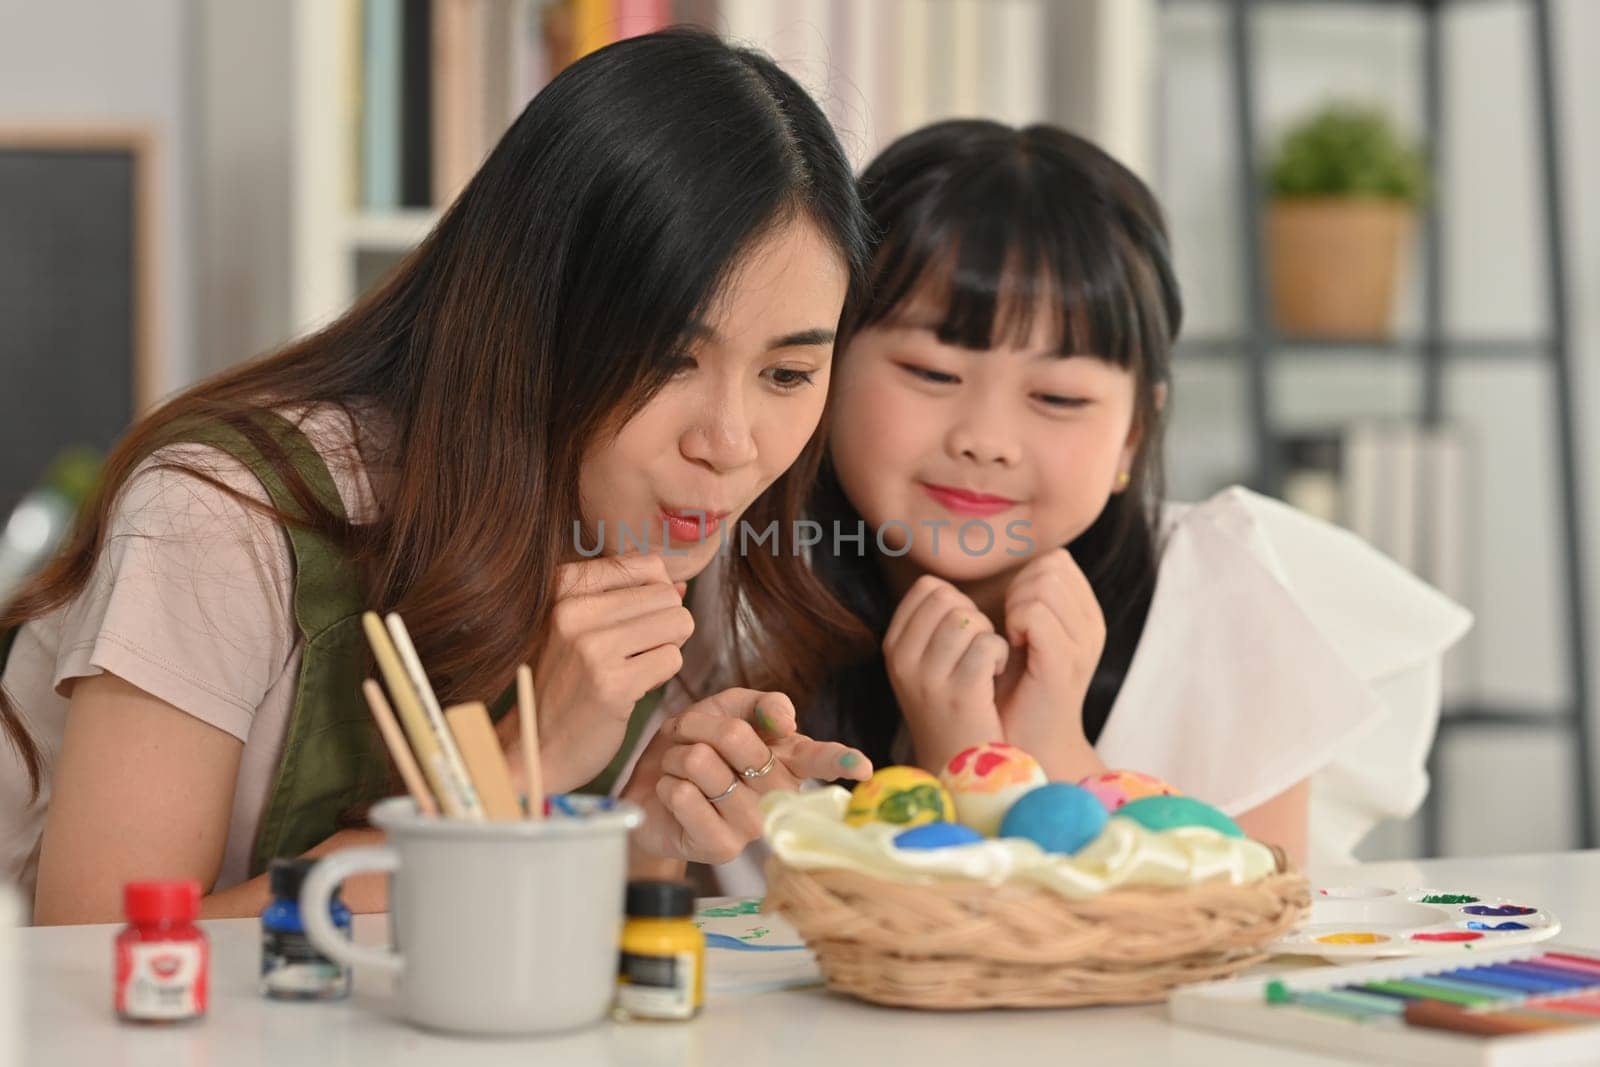 Little child girl and mother preparing for Easter holiday at home together, painting eggs in living room.